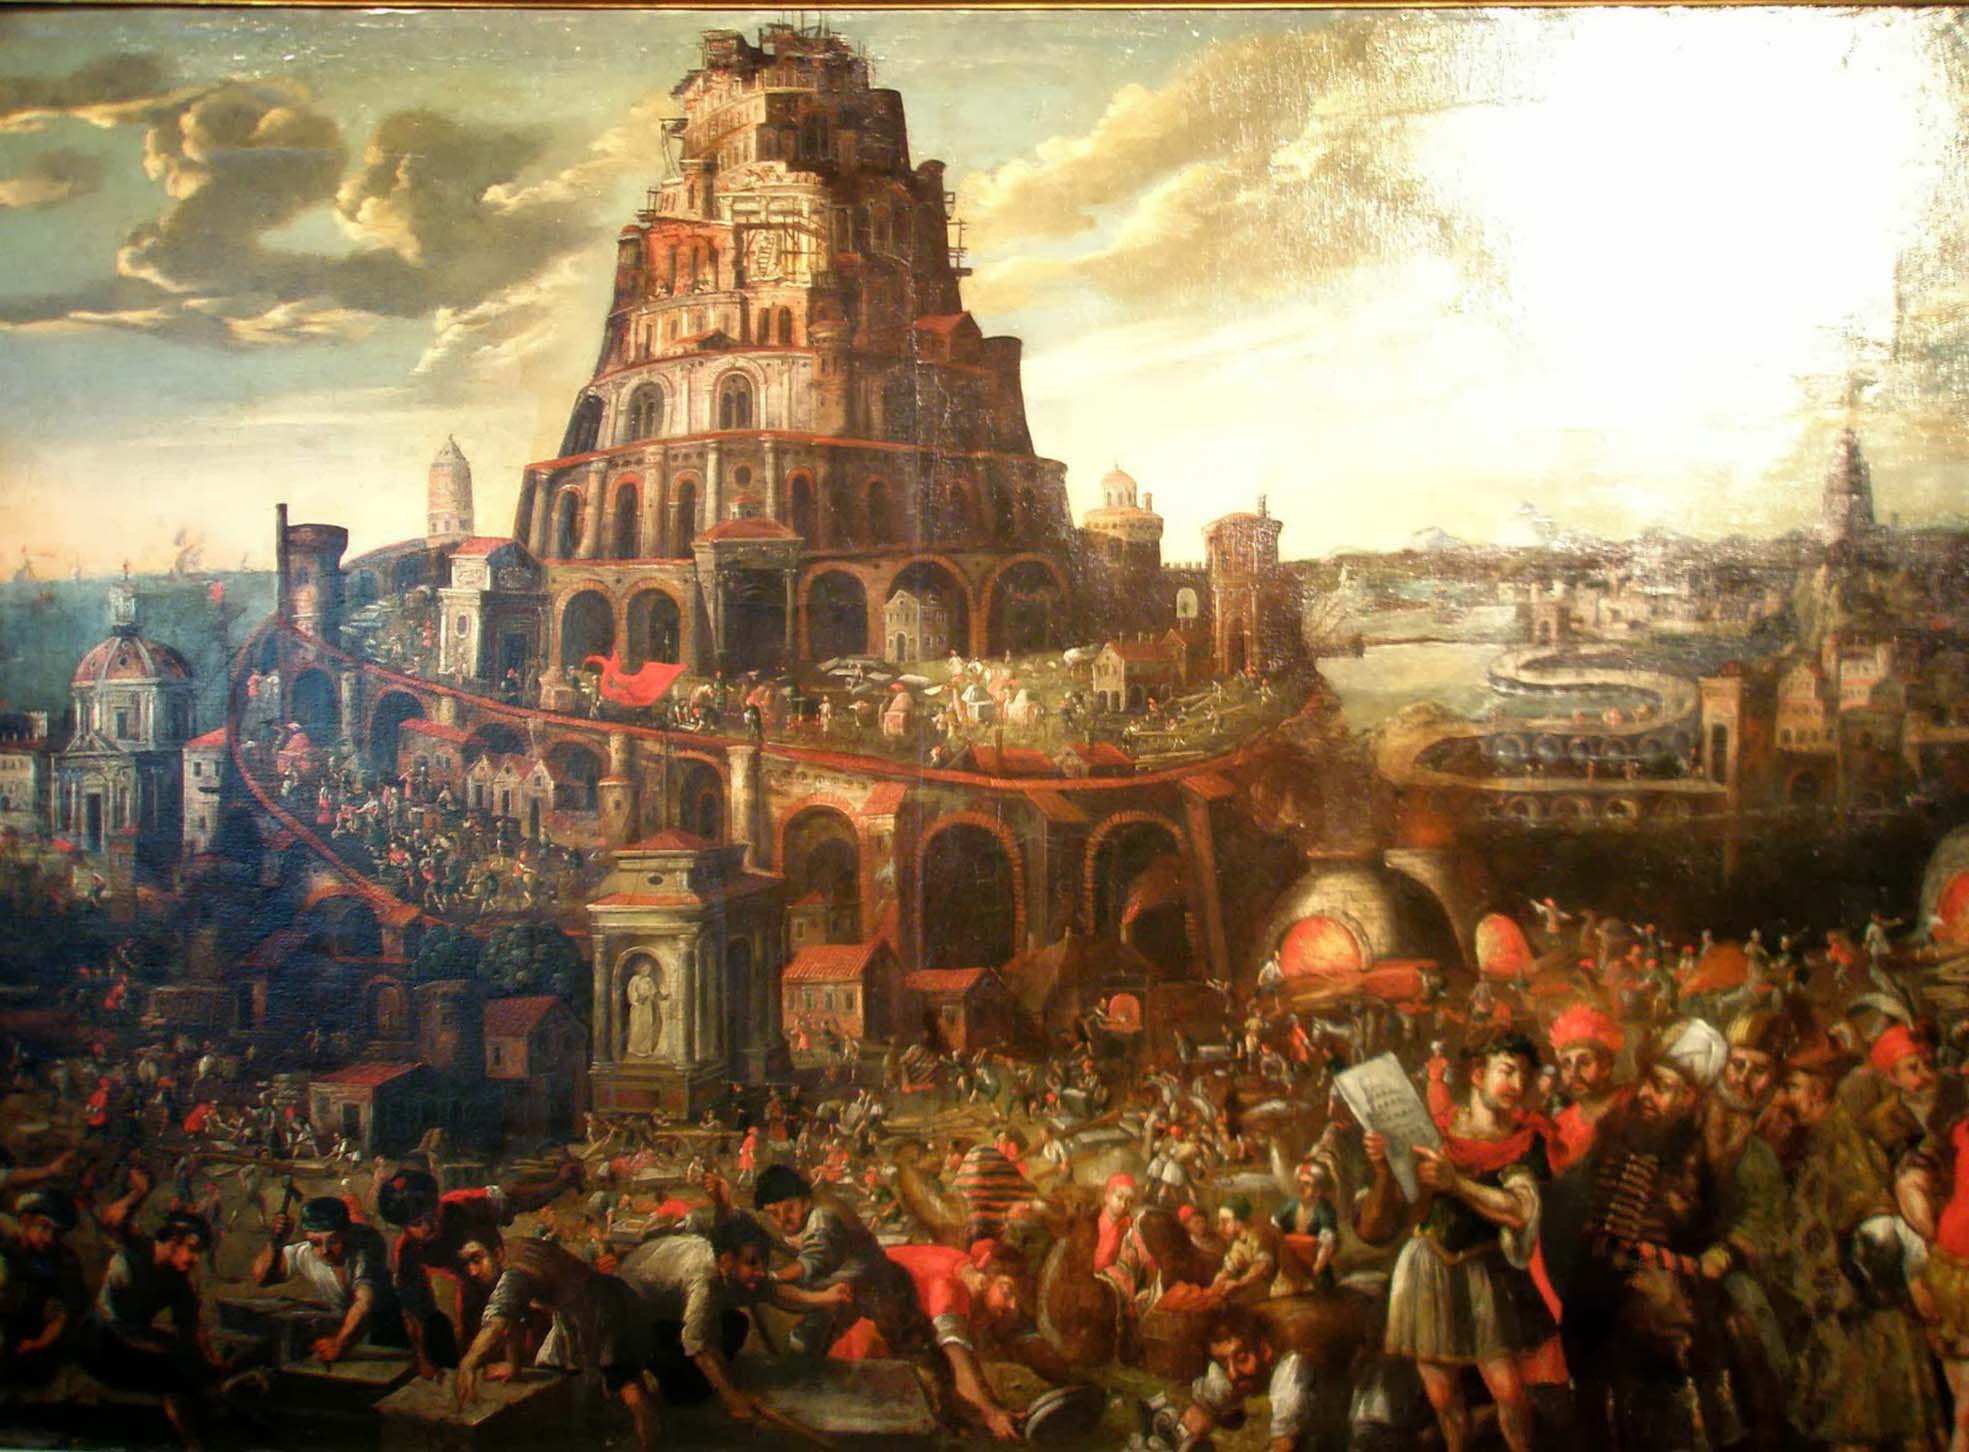 The tower of Babel | Protect me from what I want